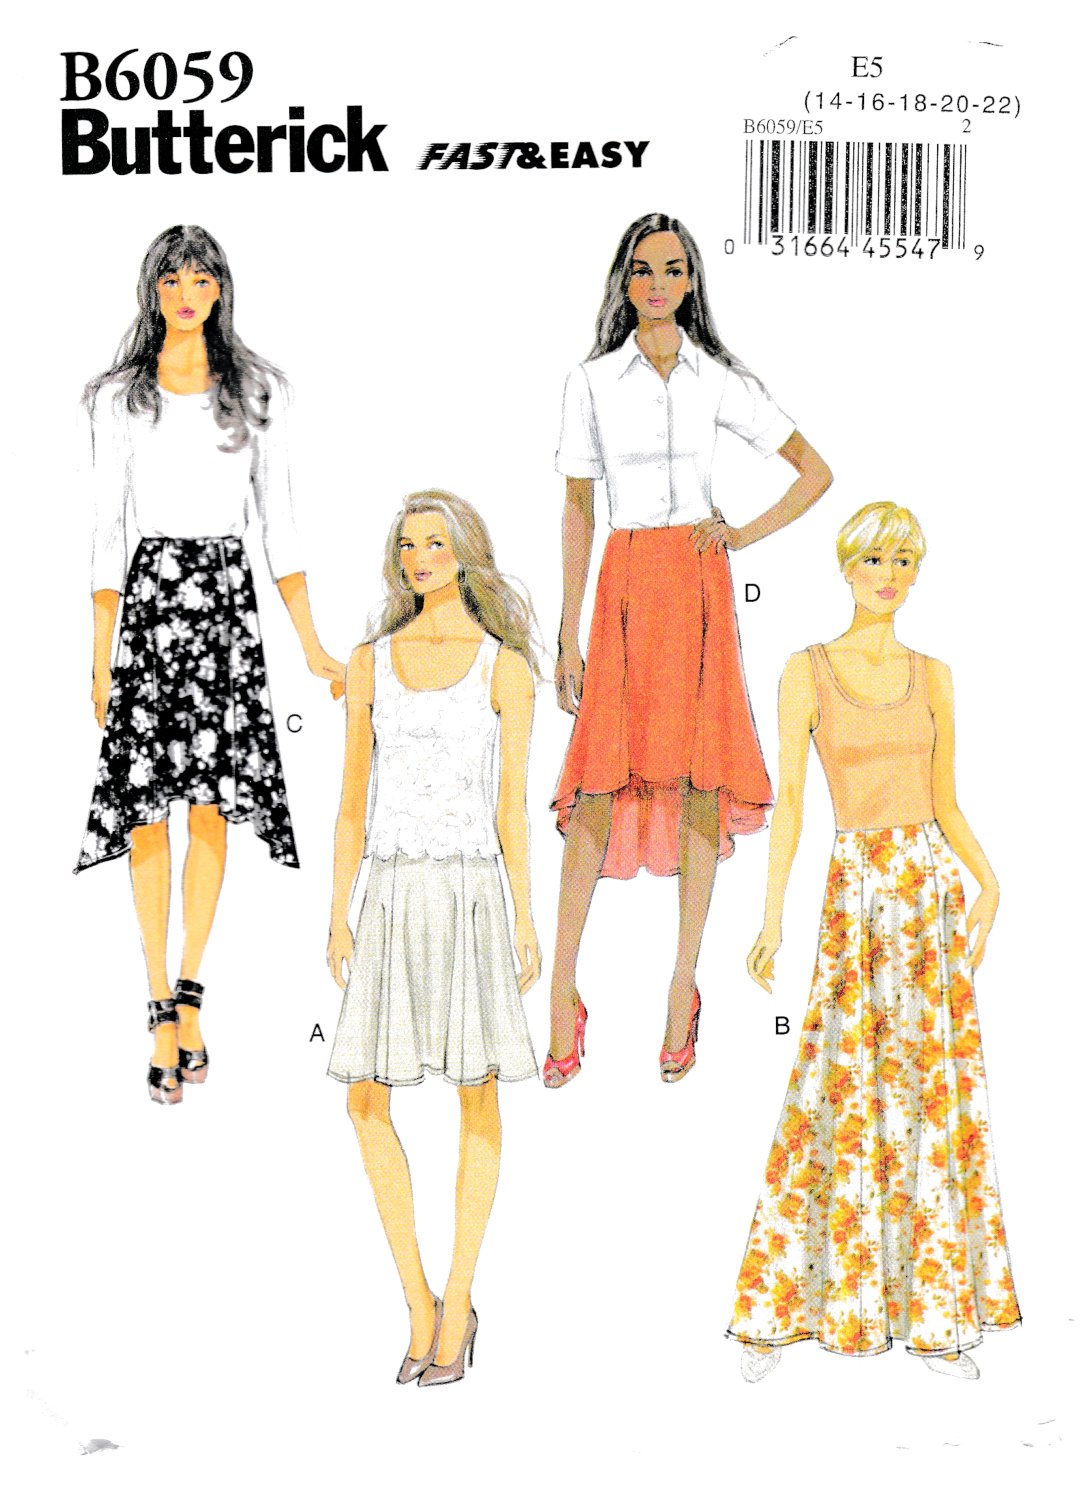 Butterick B6059 Misses Skirts Shaped Hem Variations Sewing Pattern Sizes 14-16-18-20-22